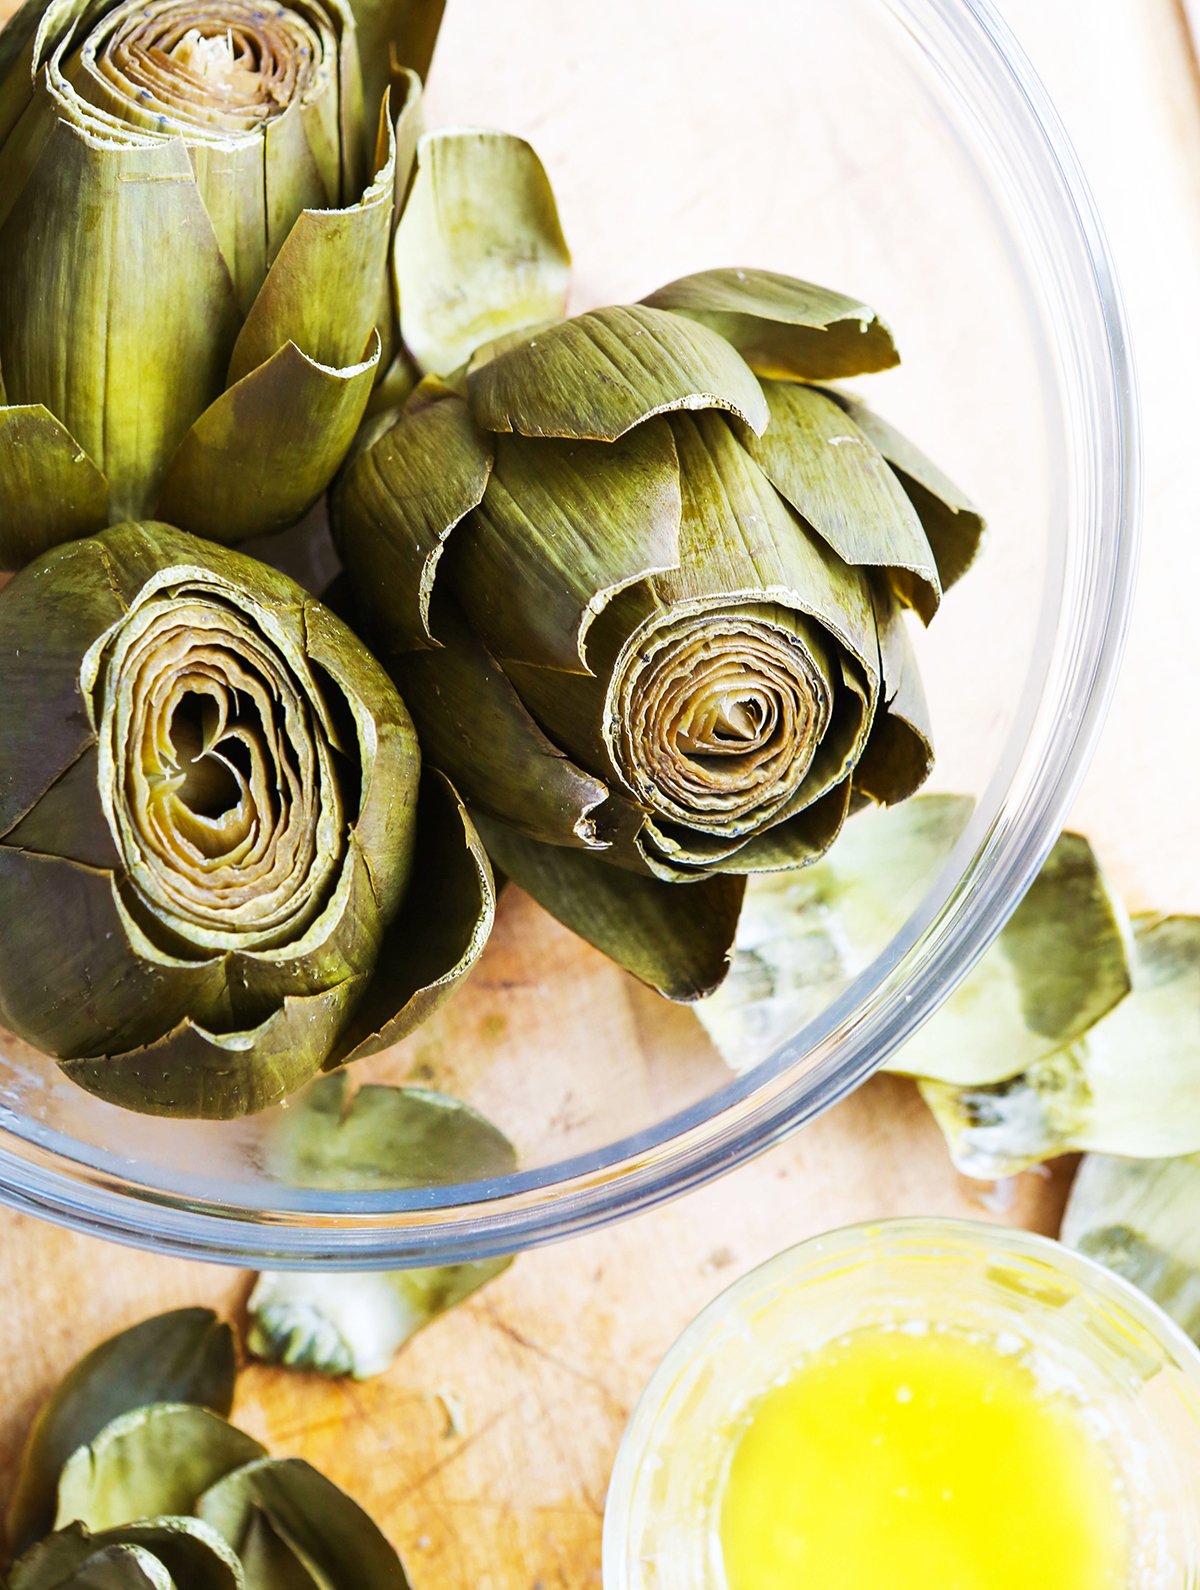 Large glass bowl filled with cooked artichokes, sitting next to a smaller bowl of melted butter.